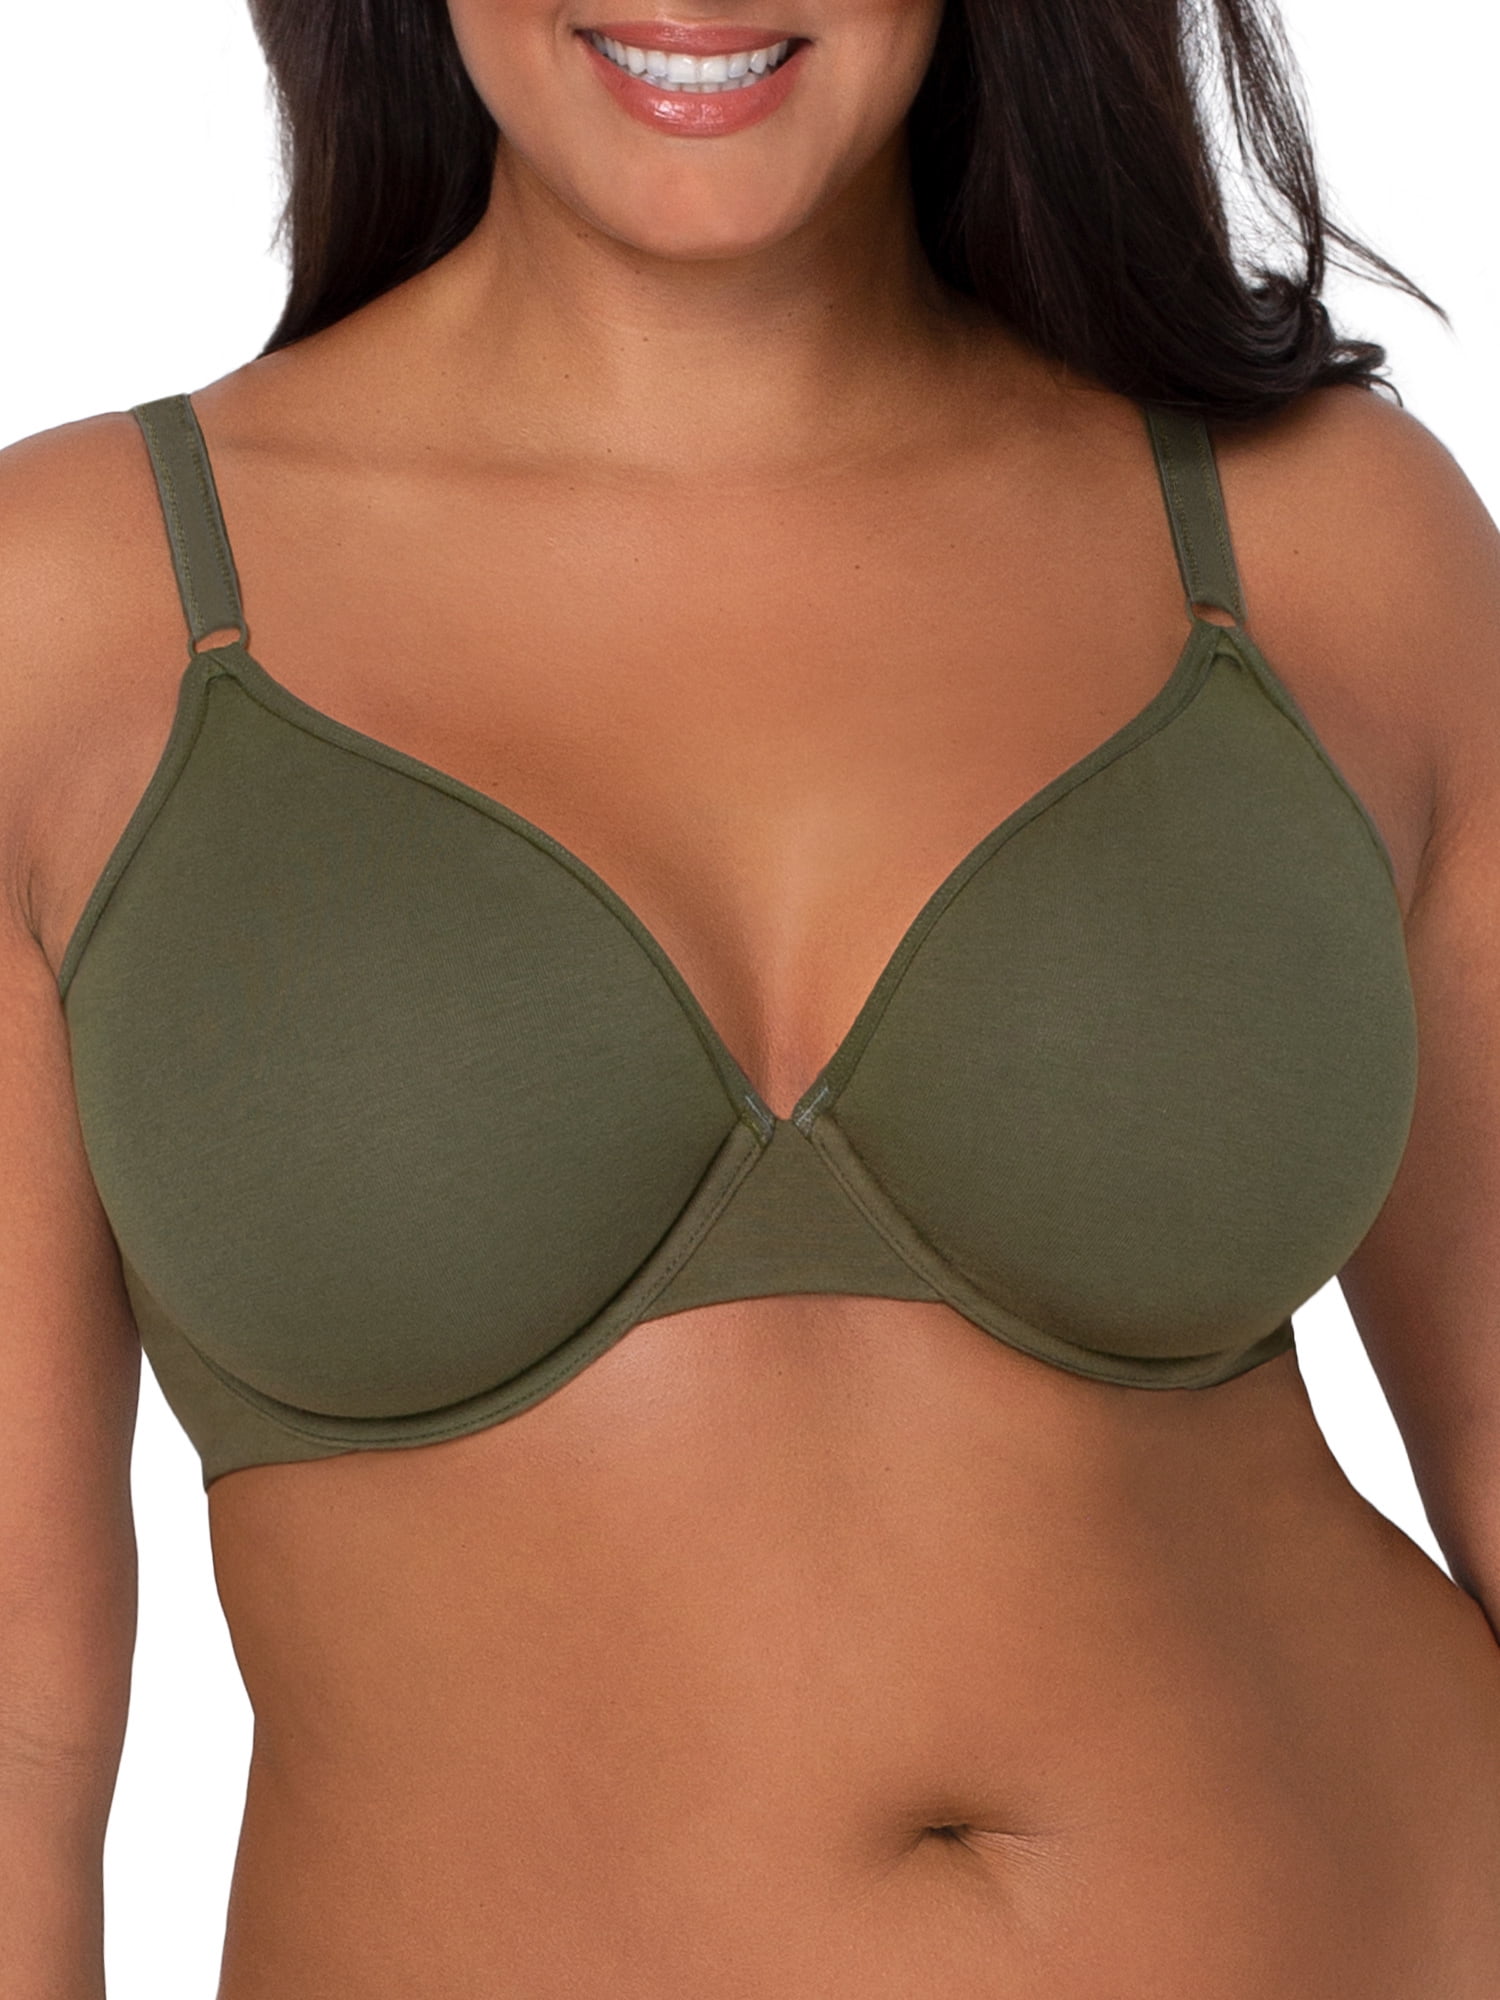 Fruit of the Loom Women's Cotton Stretch Extreme Comfort Bra, Style FT920, 2 -Pack 